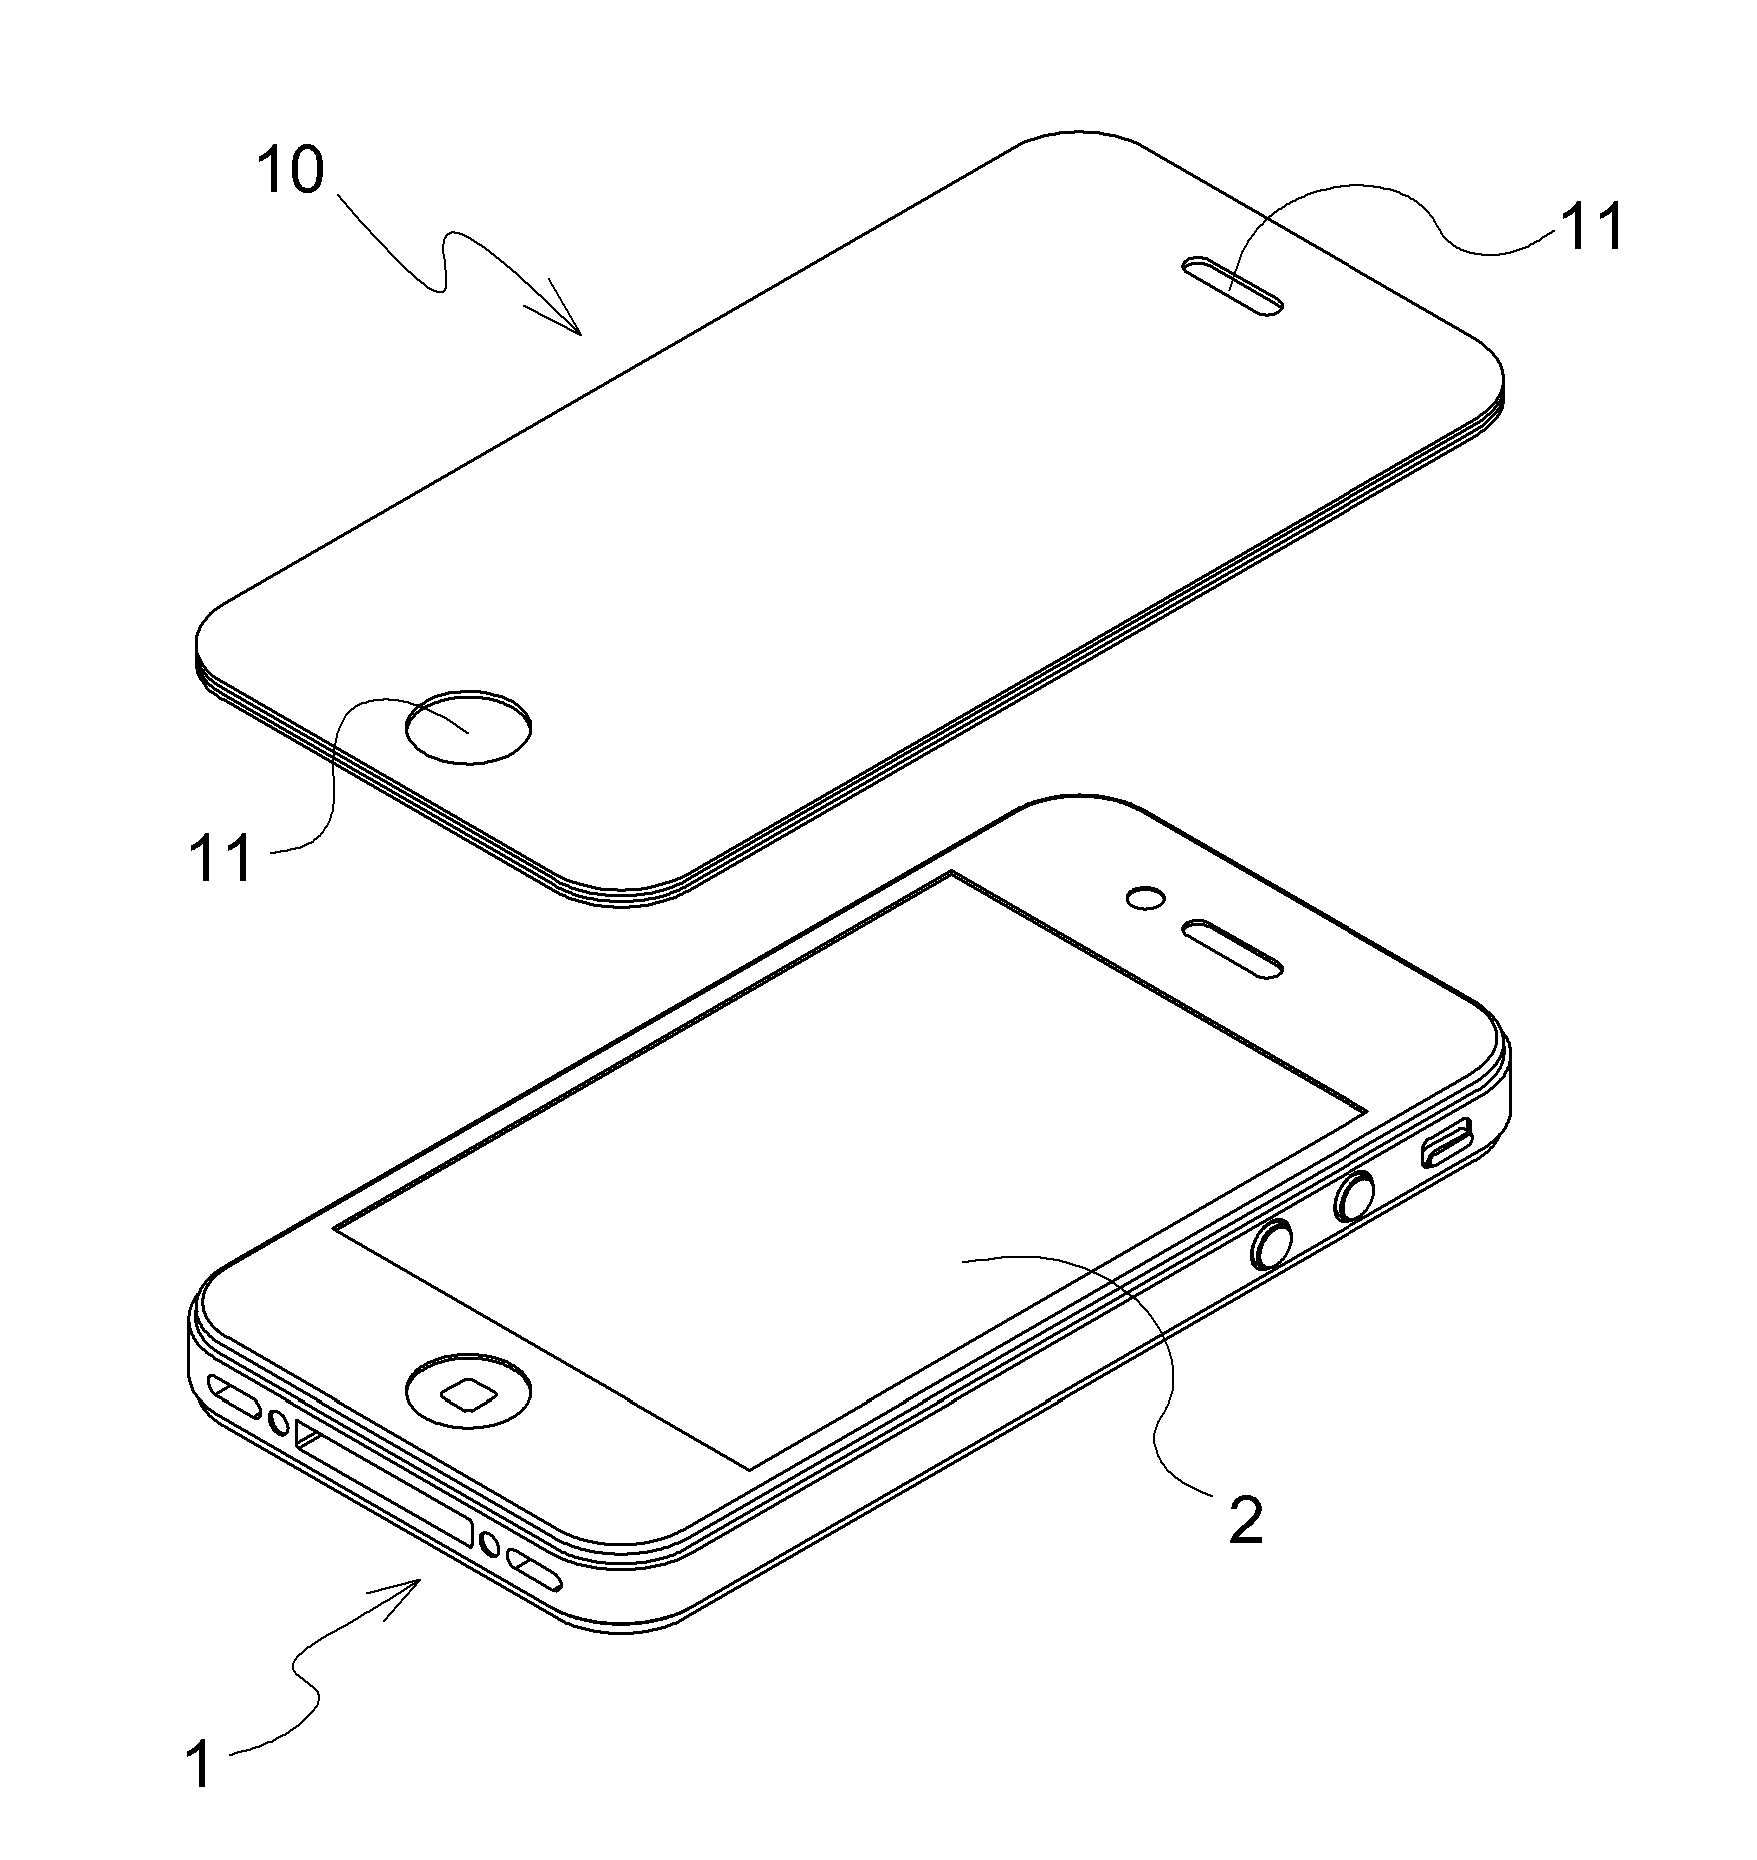 Protective film for portable electronic device using reinforced glass